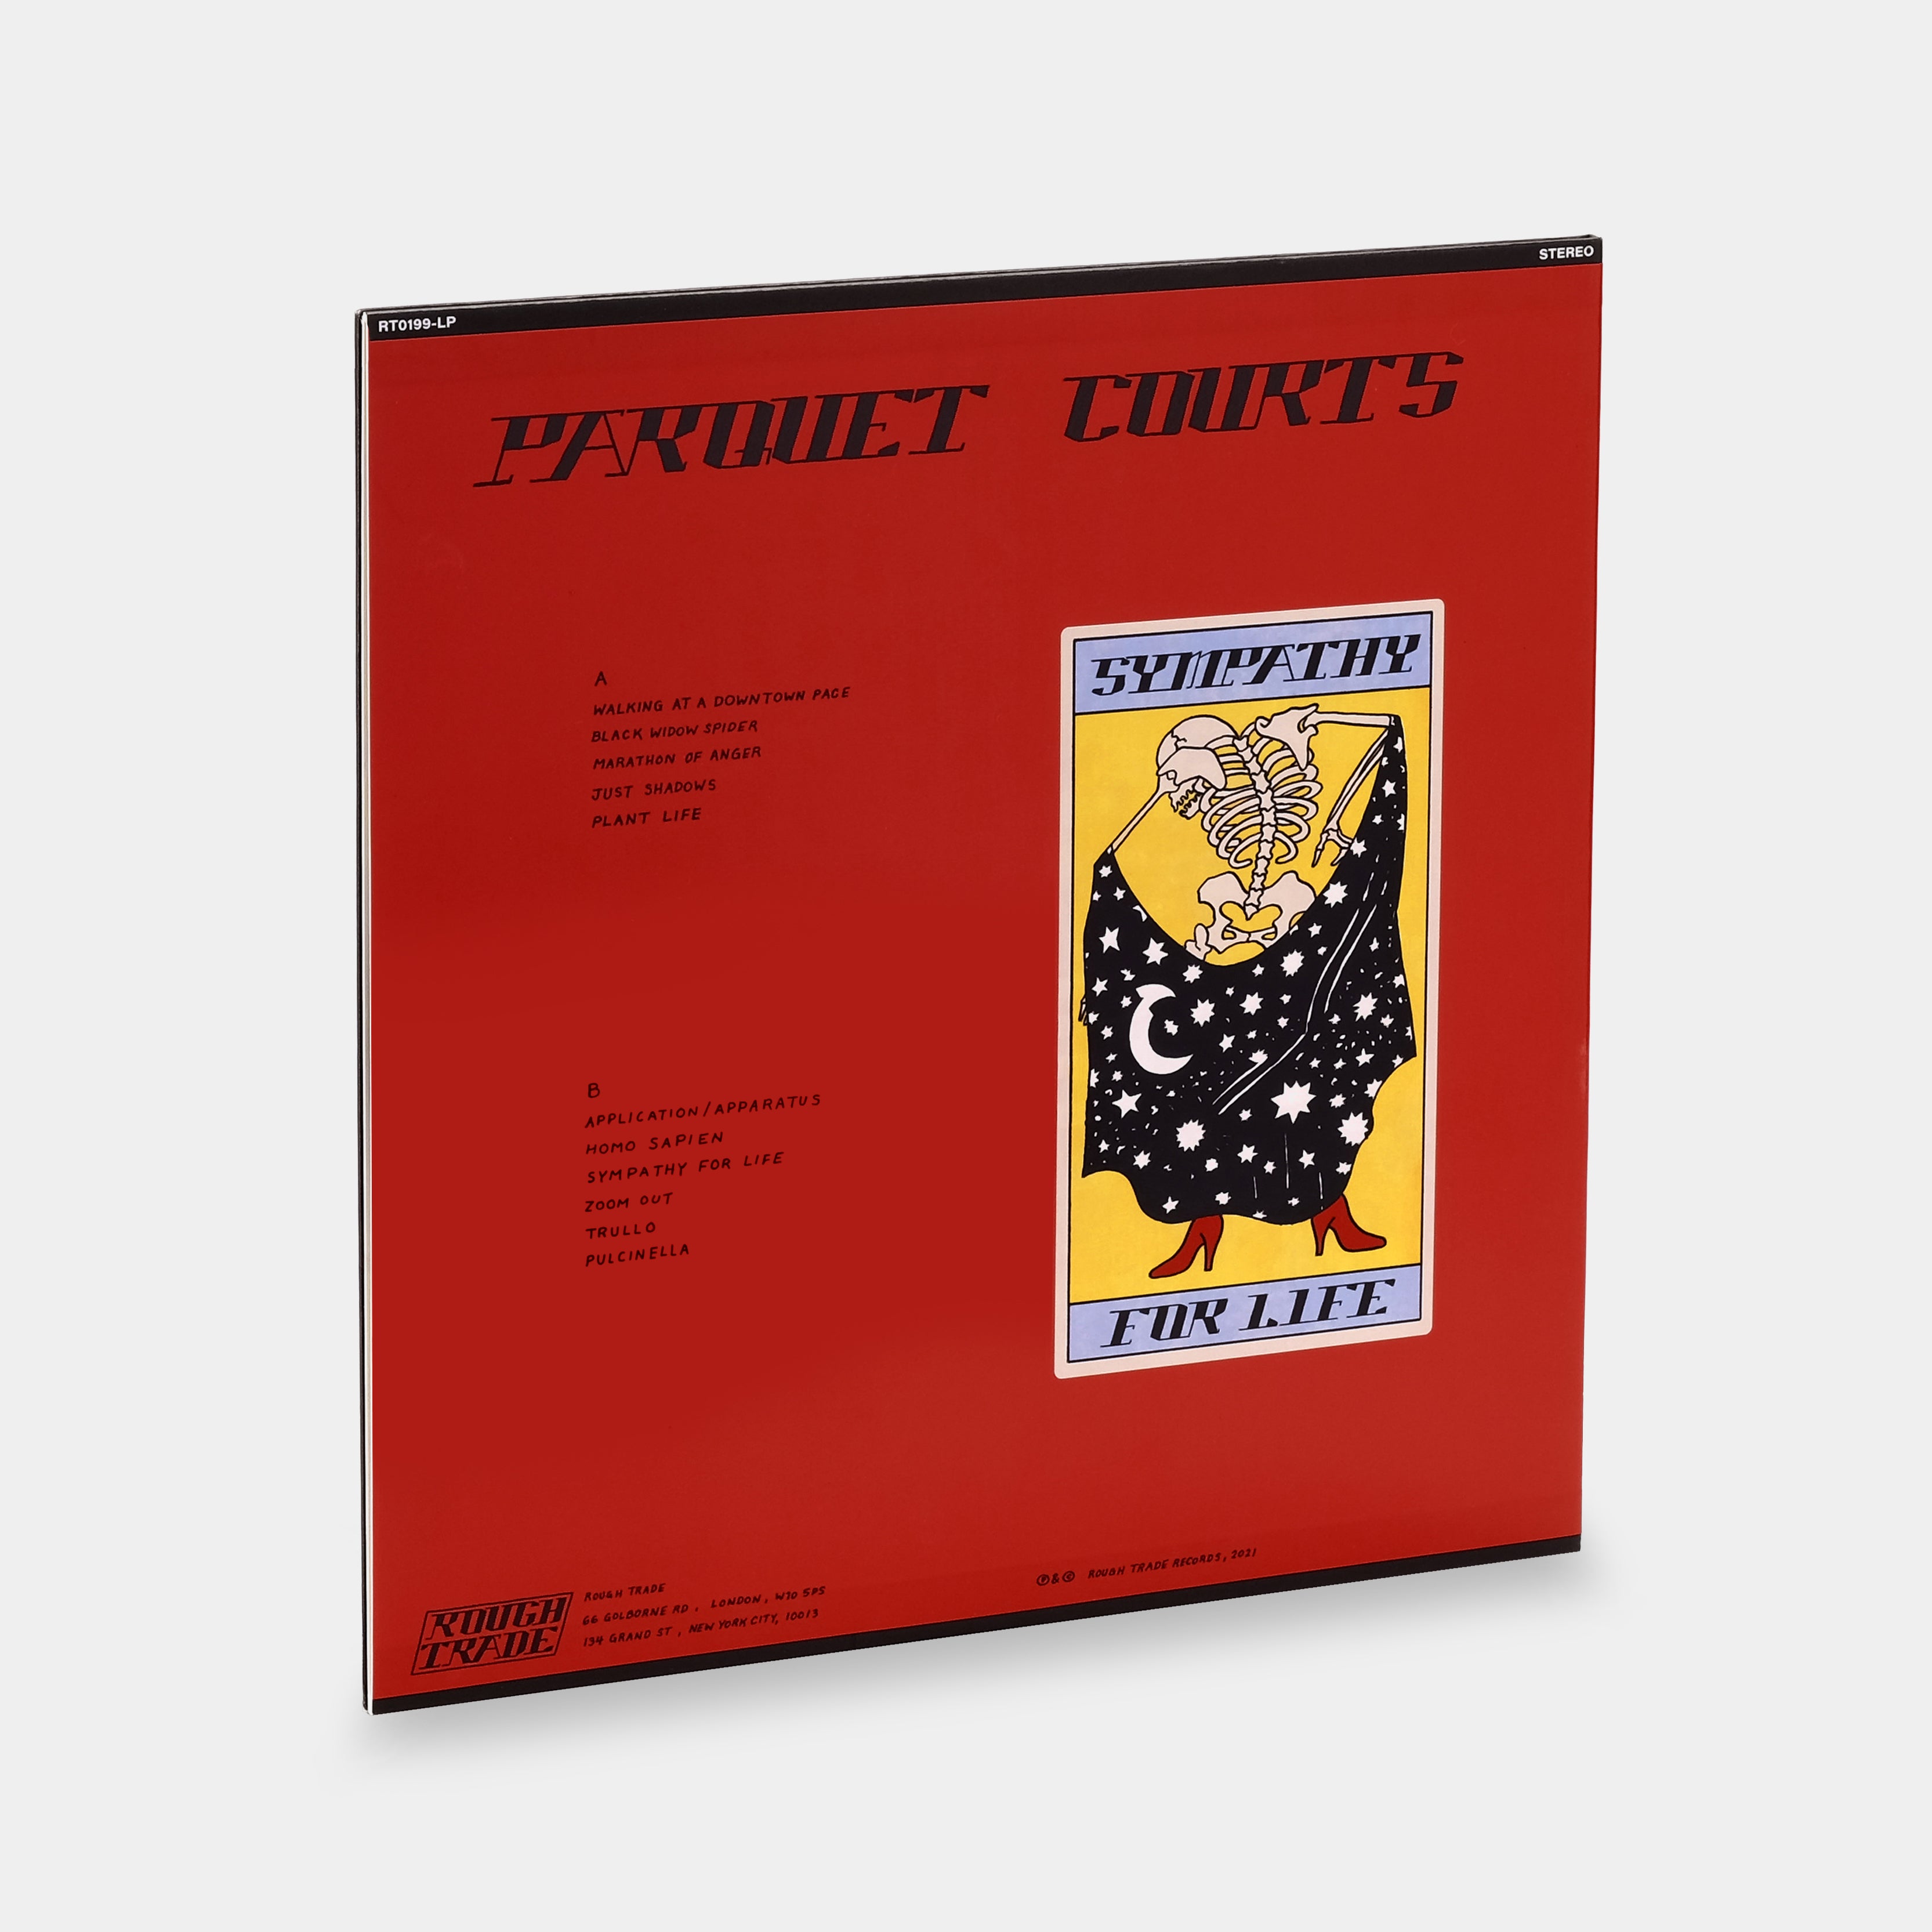 Parquet Courts - Sympathy For Life (Special Edition First Pressing) LP Vinyl Record